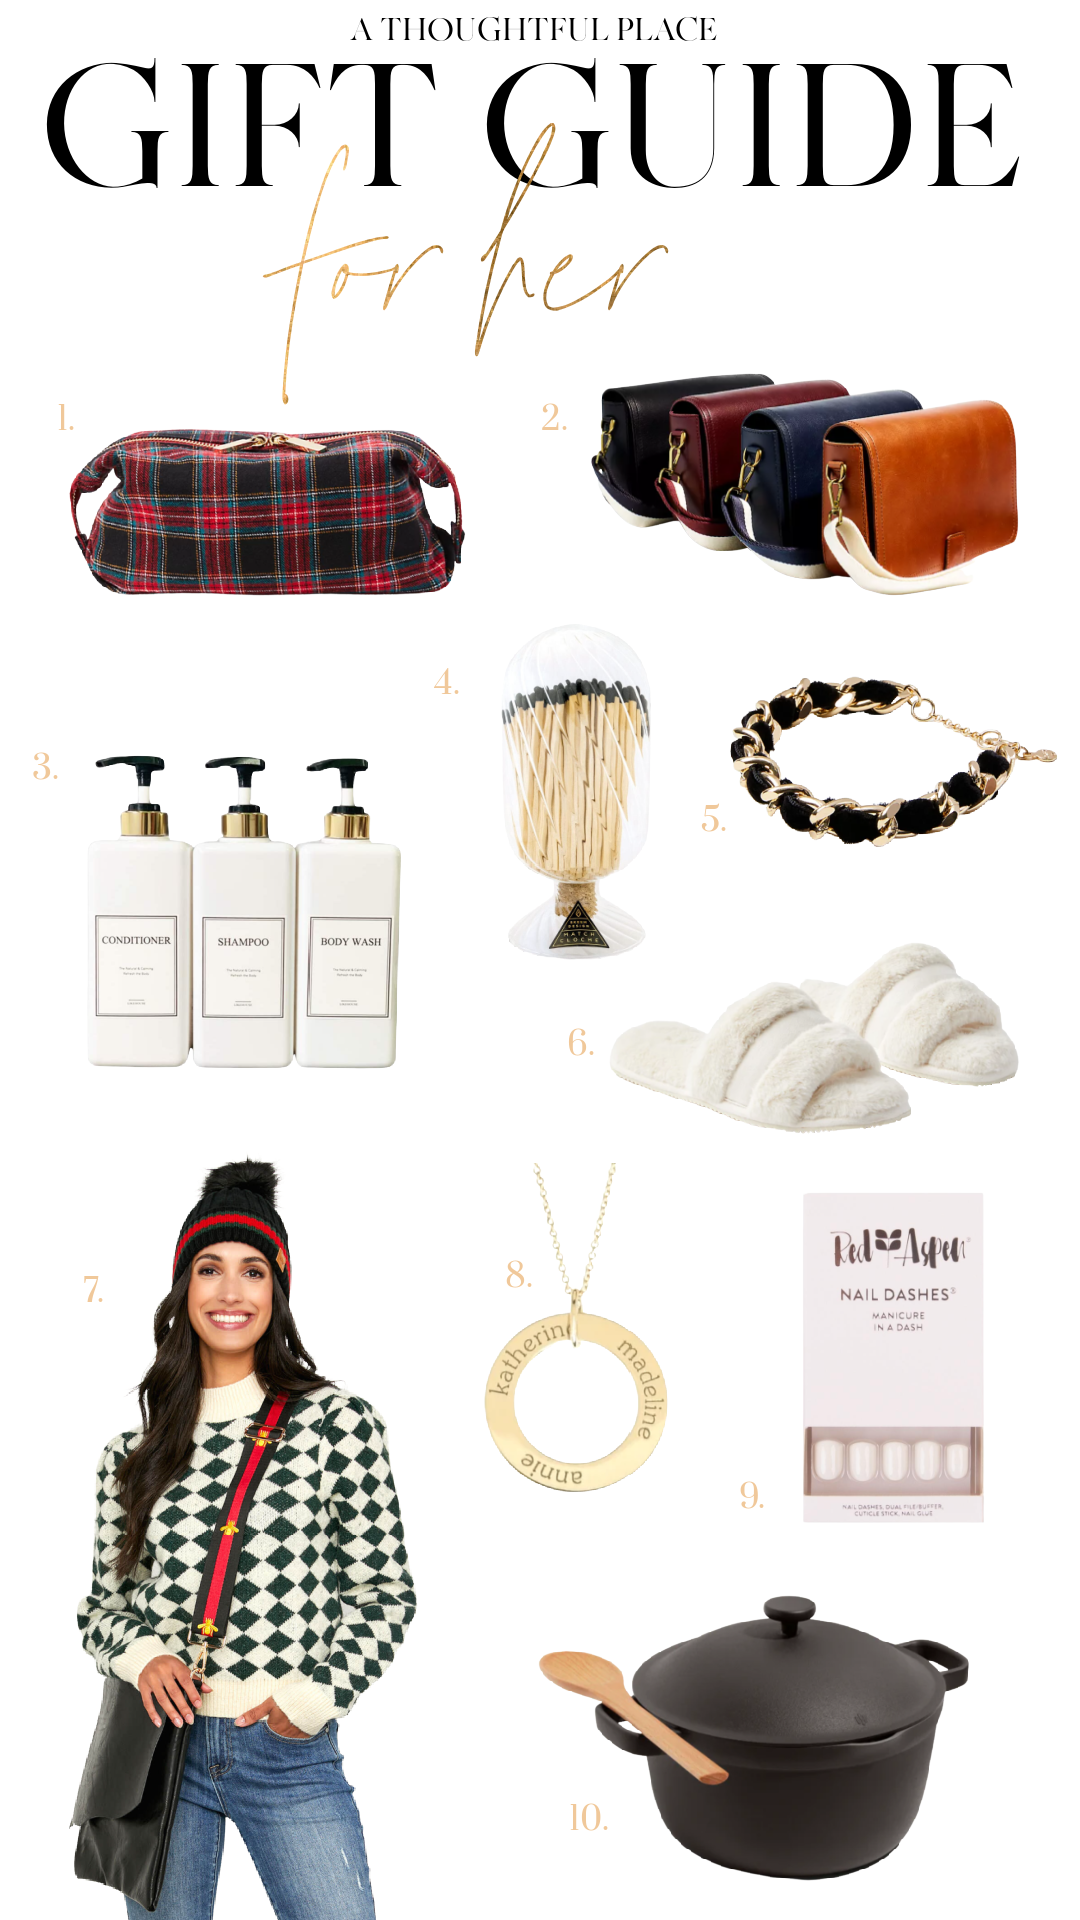 10 GIFT IDEAS FOR HER - A Thoughtful Place